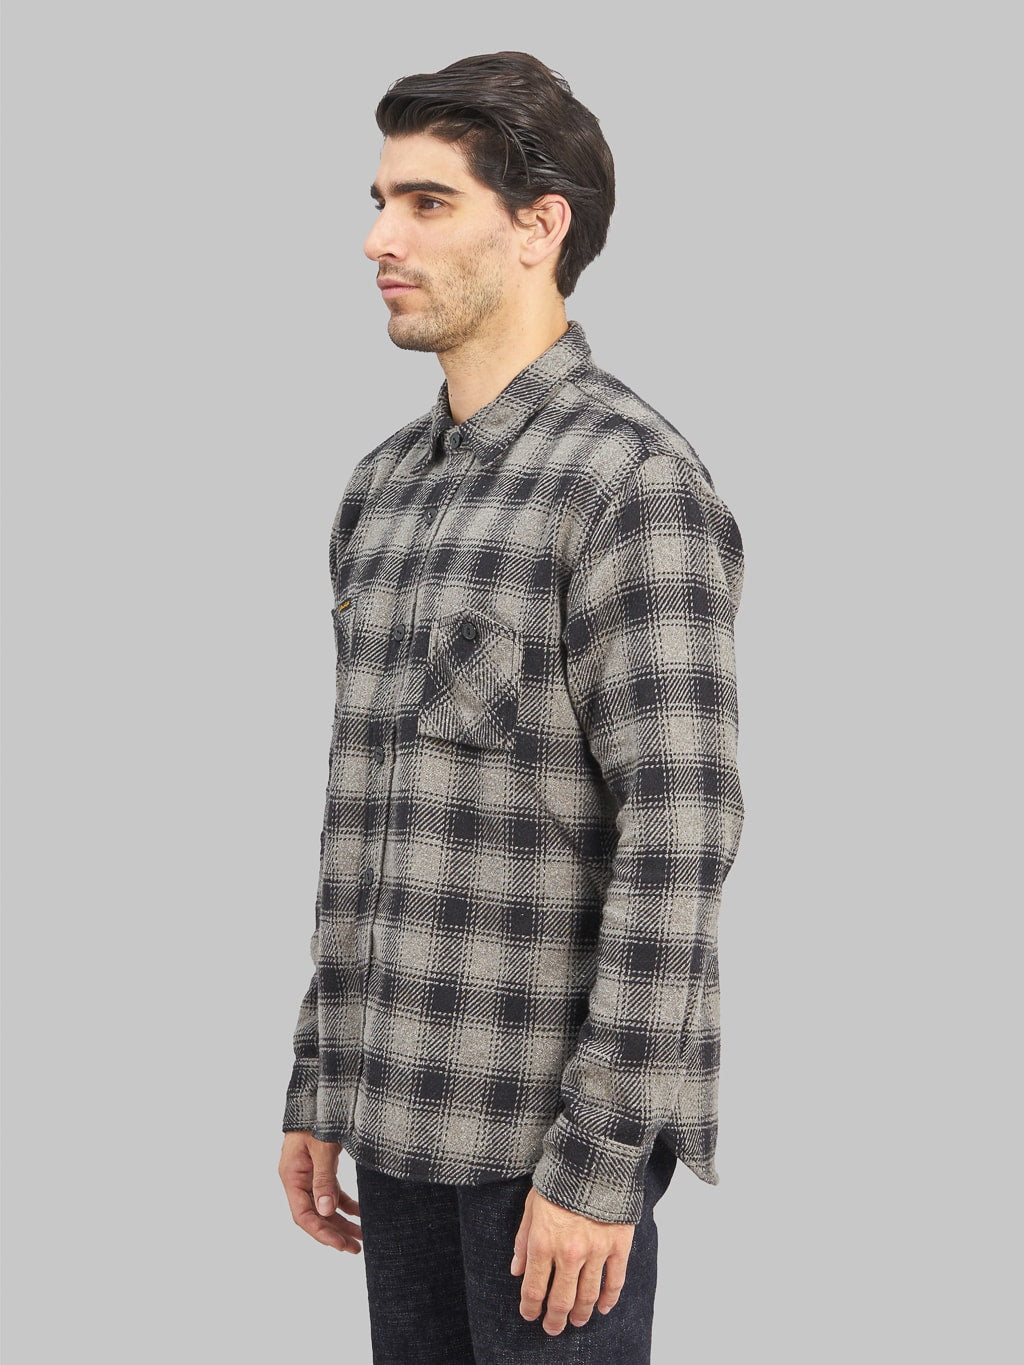 The Strike Gold SGS2203 Recycled Cotton Flannel Mixed Nep Check Work Shirt Grey